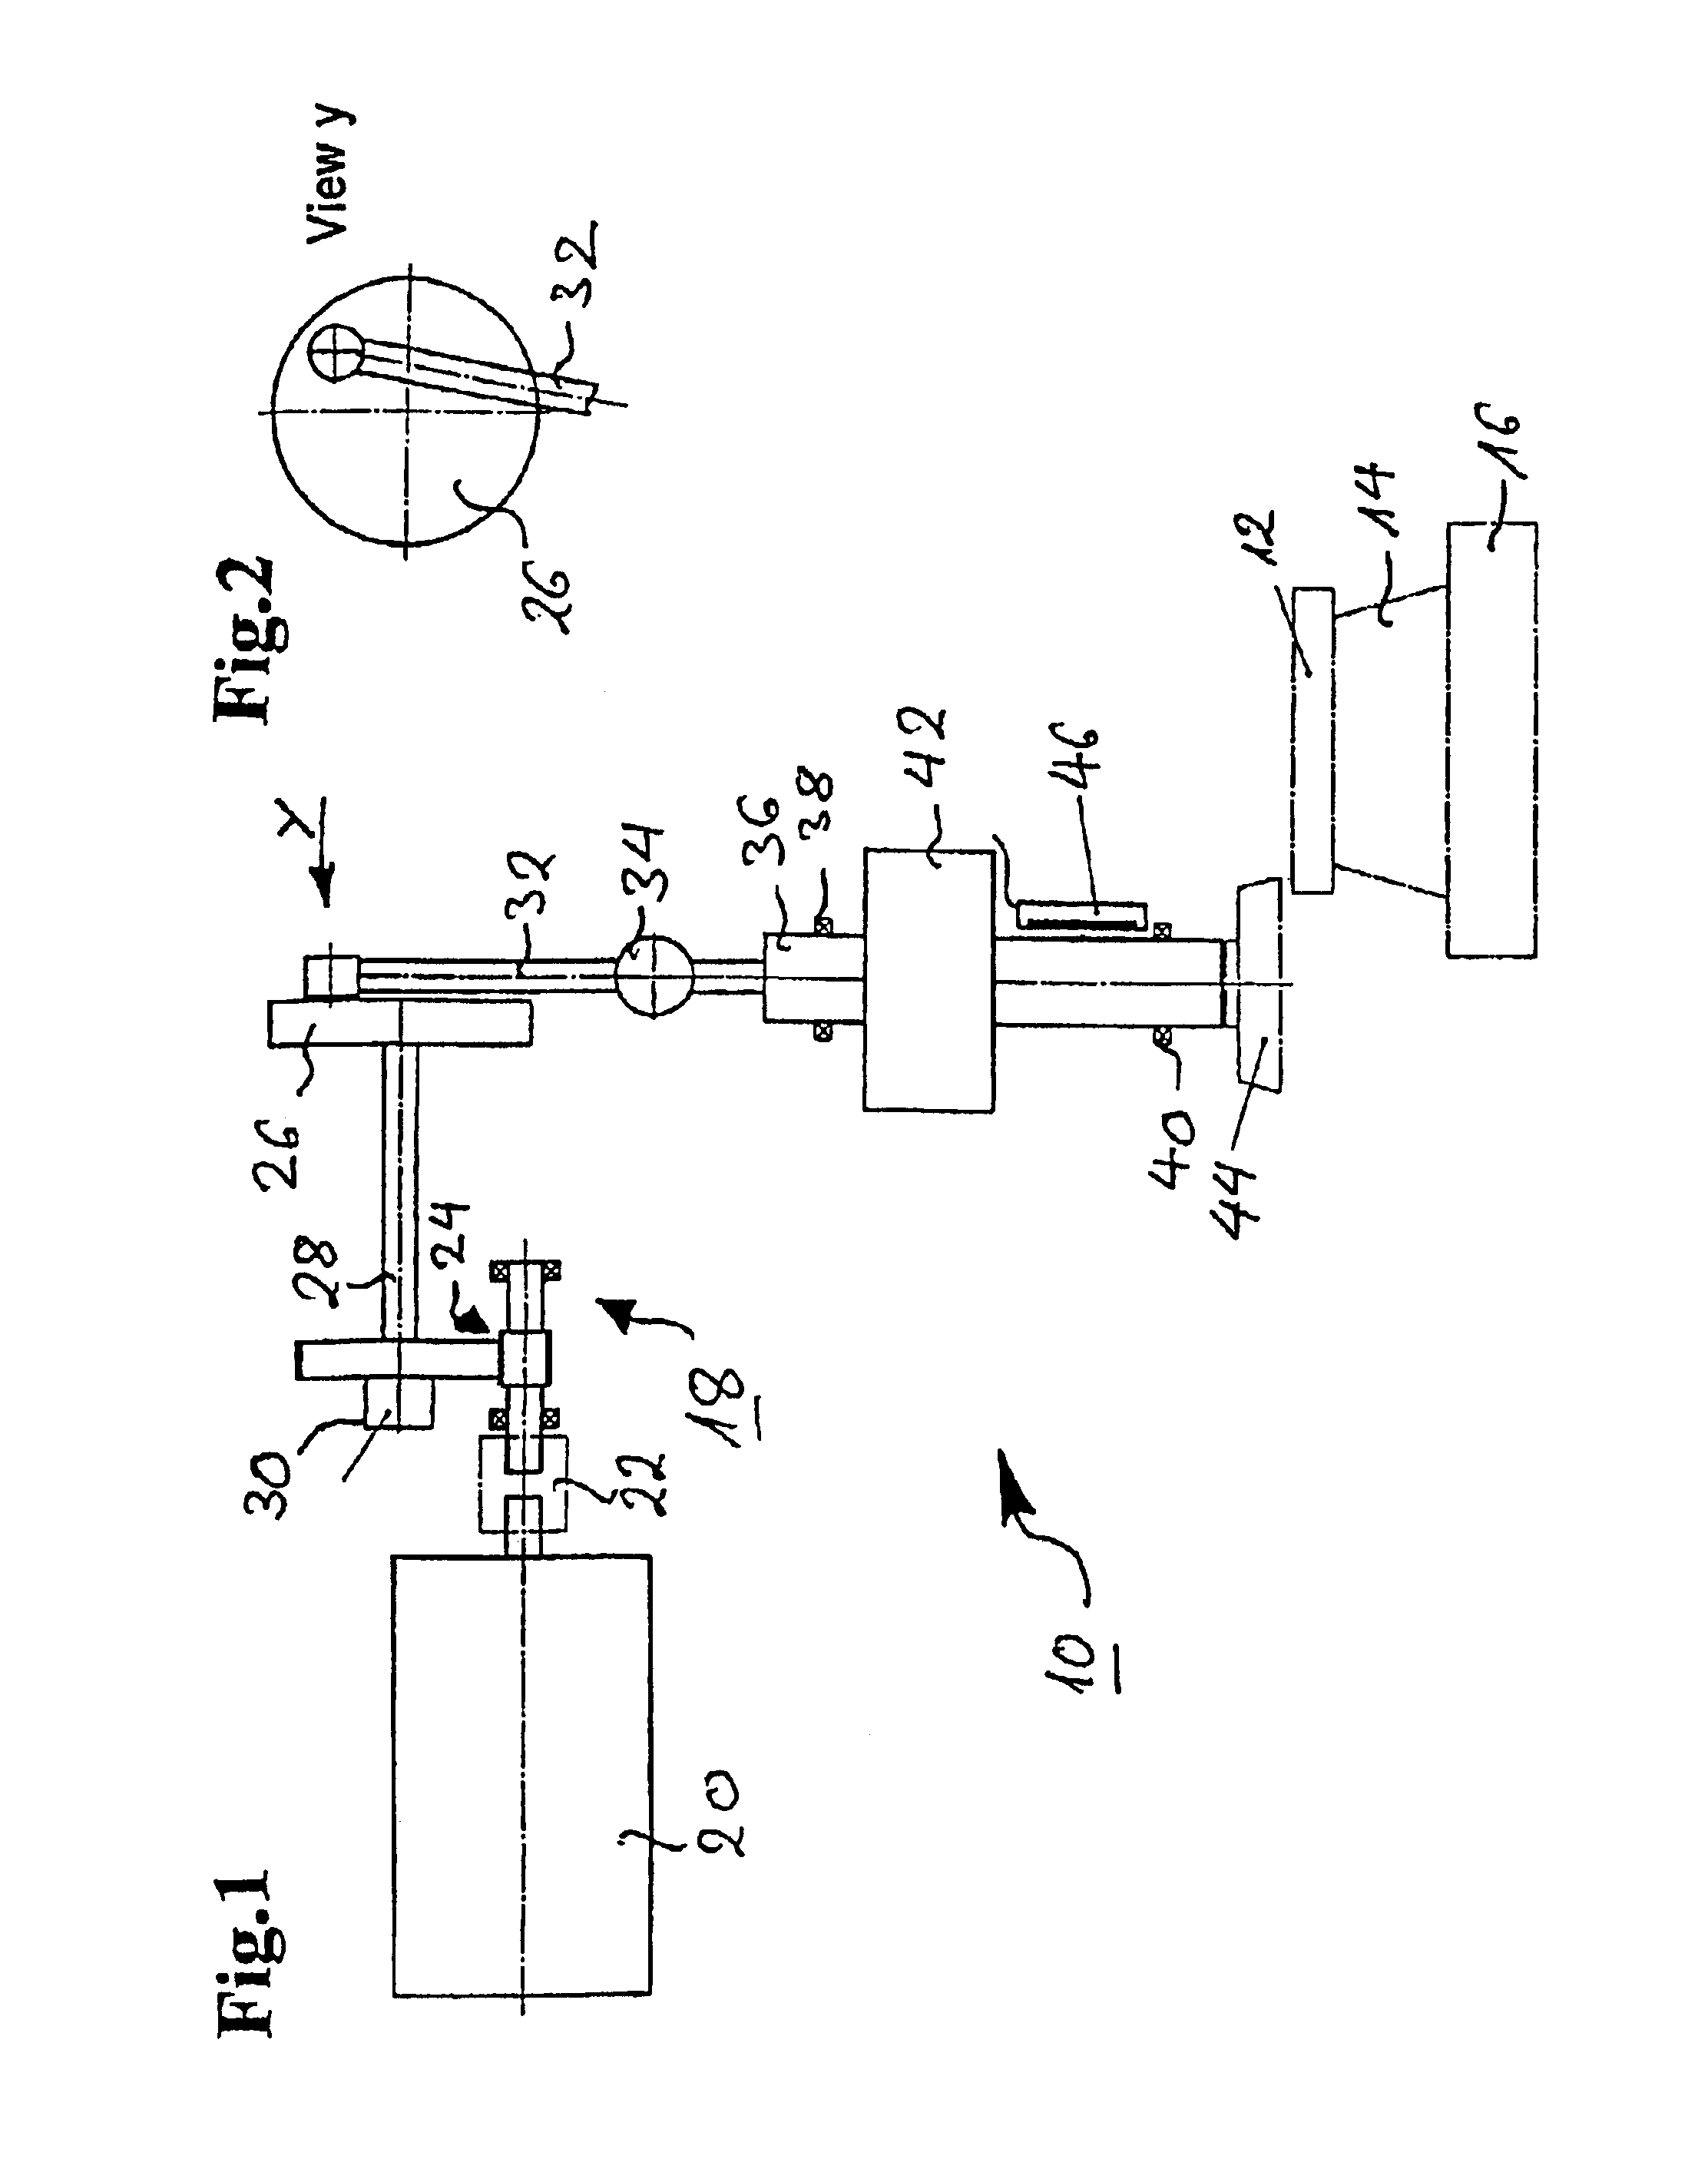 Gear shaping machine and method for the operation of a gear shaping machine